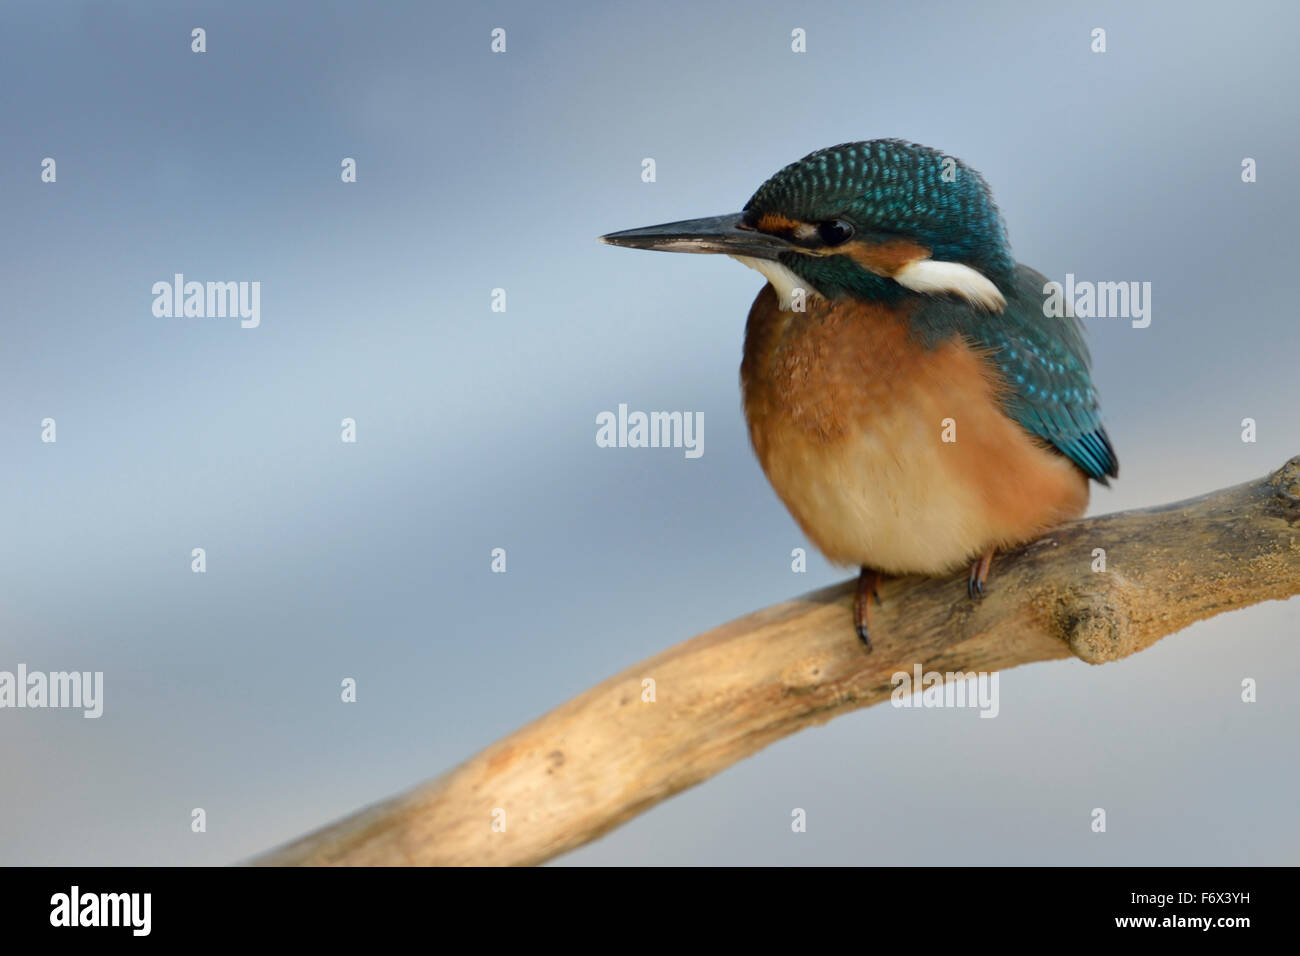 Young Common Kingfisher / Eurasian Kingfisher ( Alcedo atthis ) perching on a branch in front of a clean soft blue background. Stock Photo